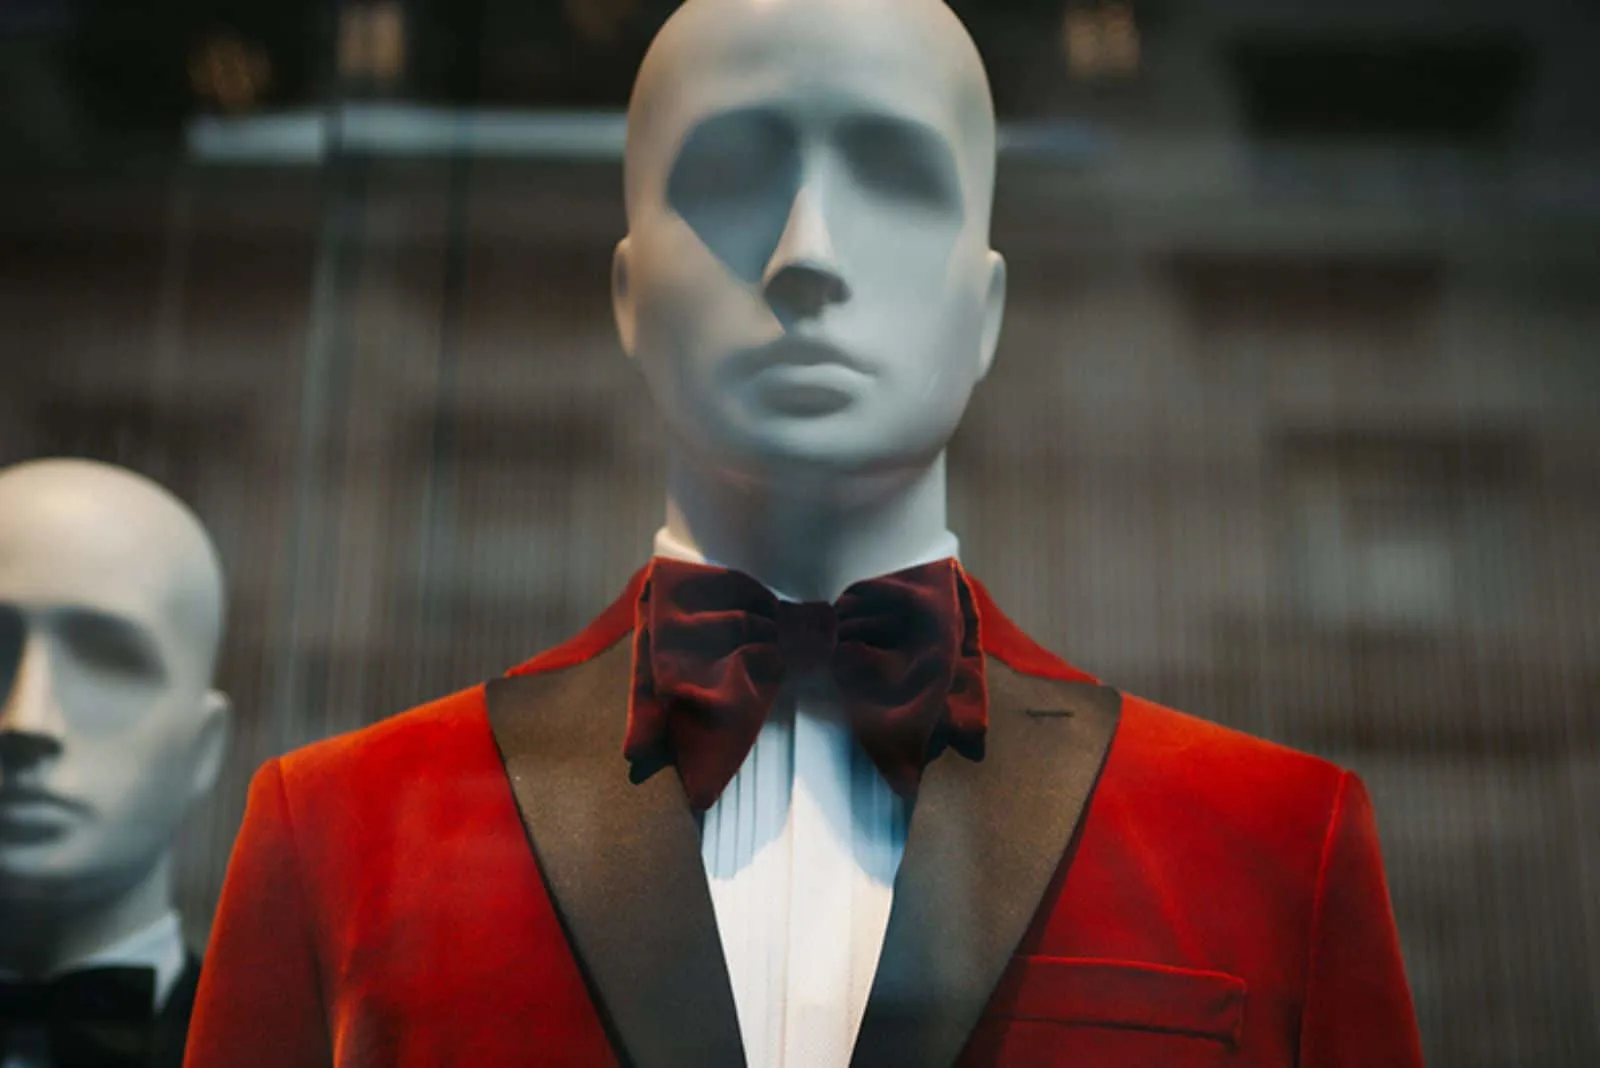 a doll in a window dressed in a red suit